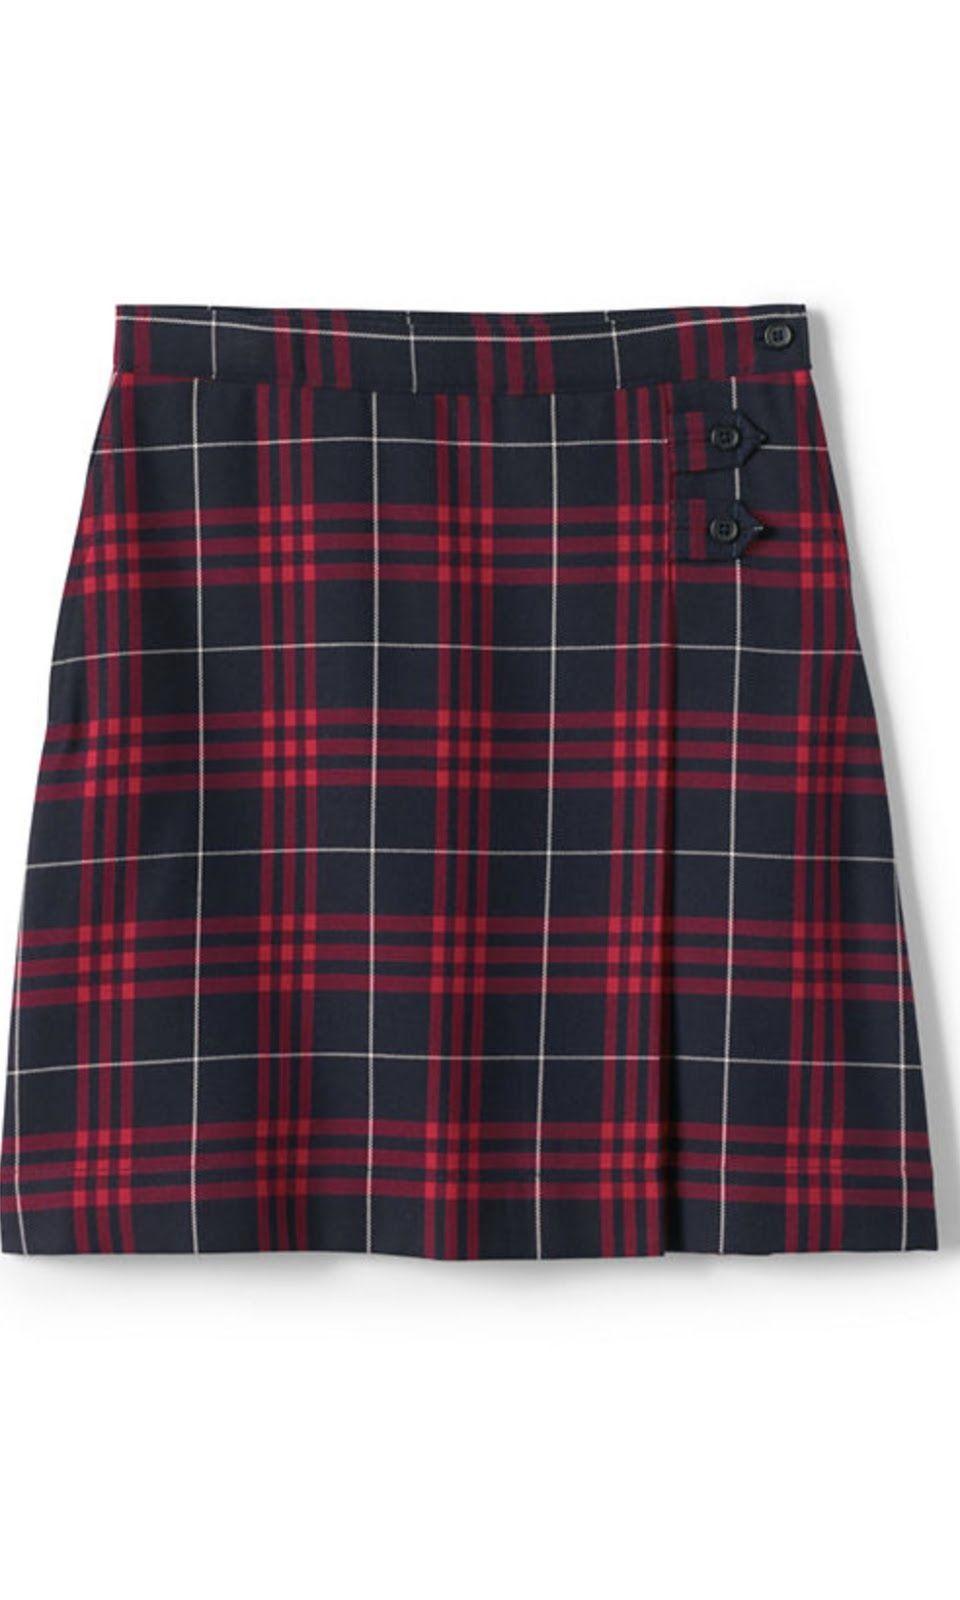 the knee A-line Skirt in Classic Navy Large Plaid (Land s End) no above the knee styles Navy or White tights, leggings Girls Oxford Blue Shirt, may also wear Peter Pan collar Shirts worn with skirts